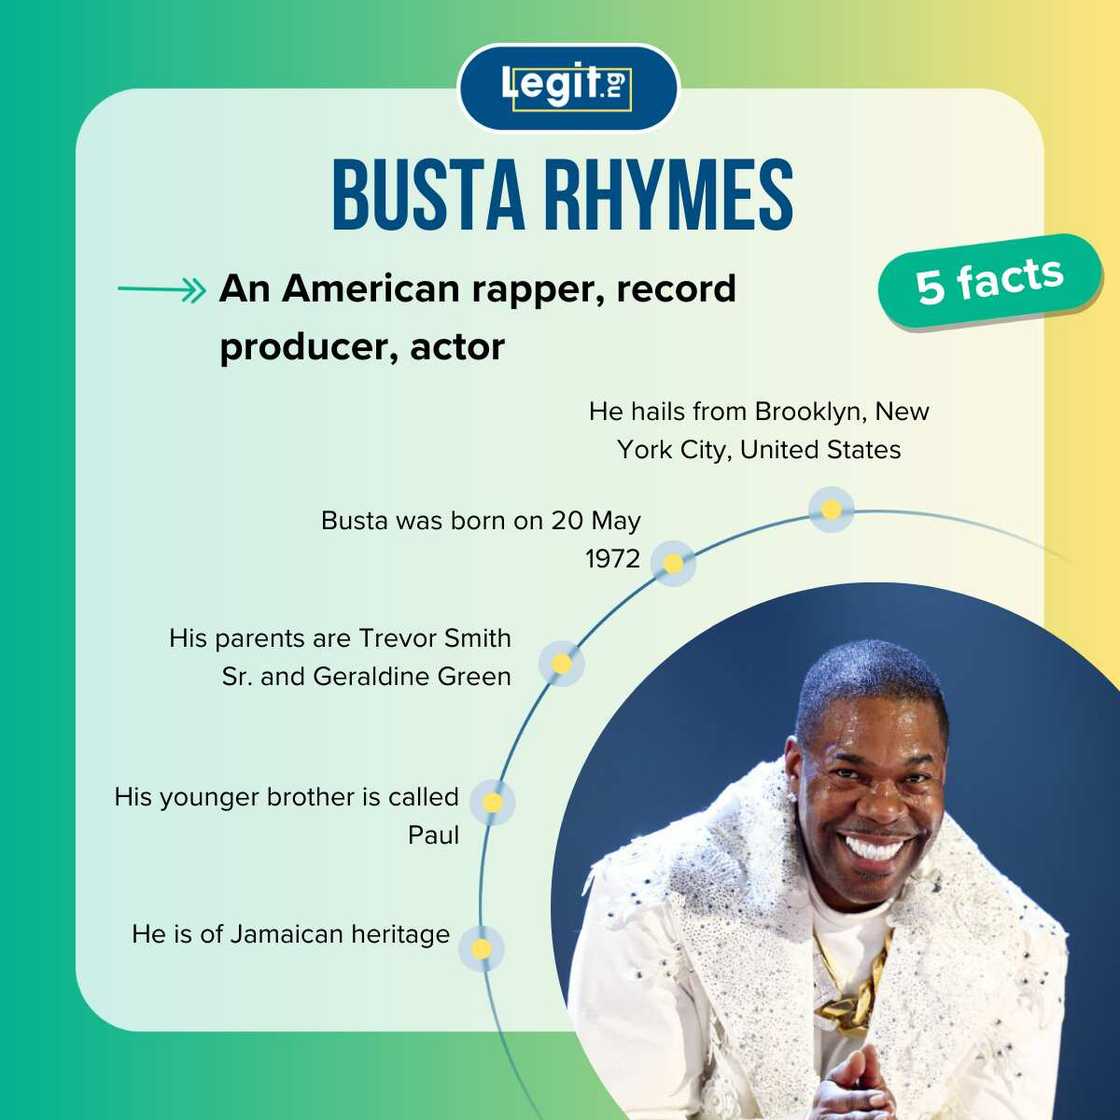 Facts about Busta Rhymes